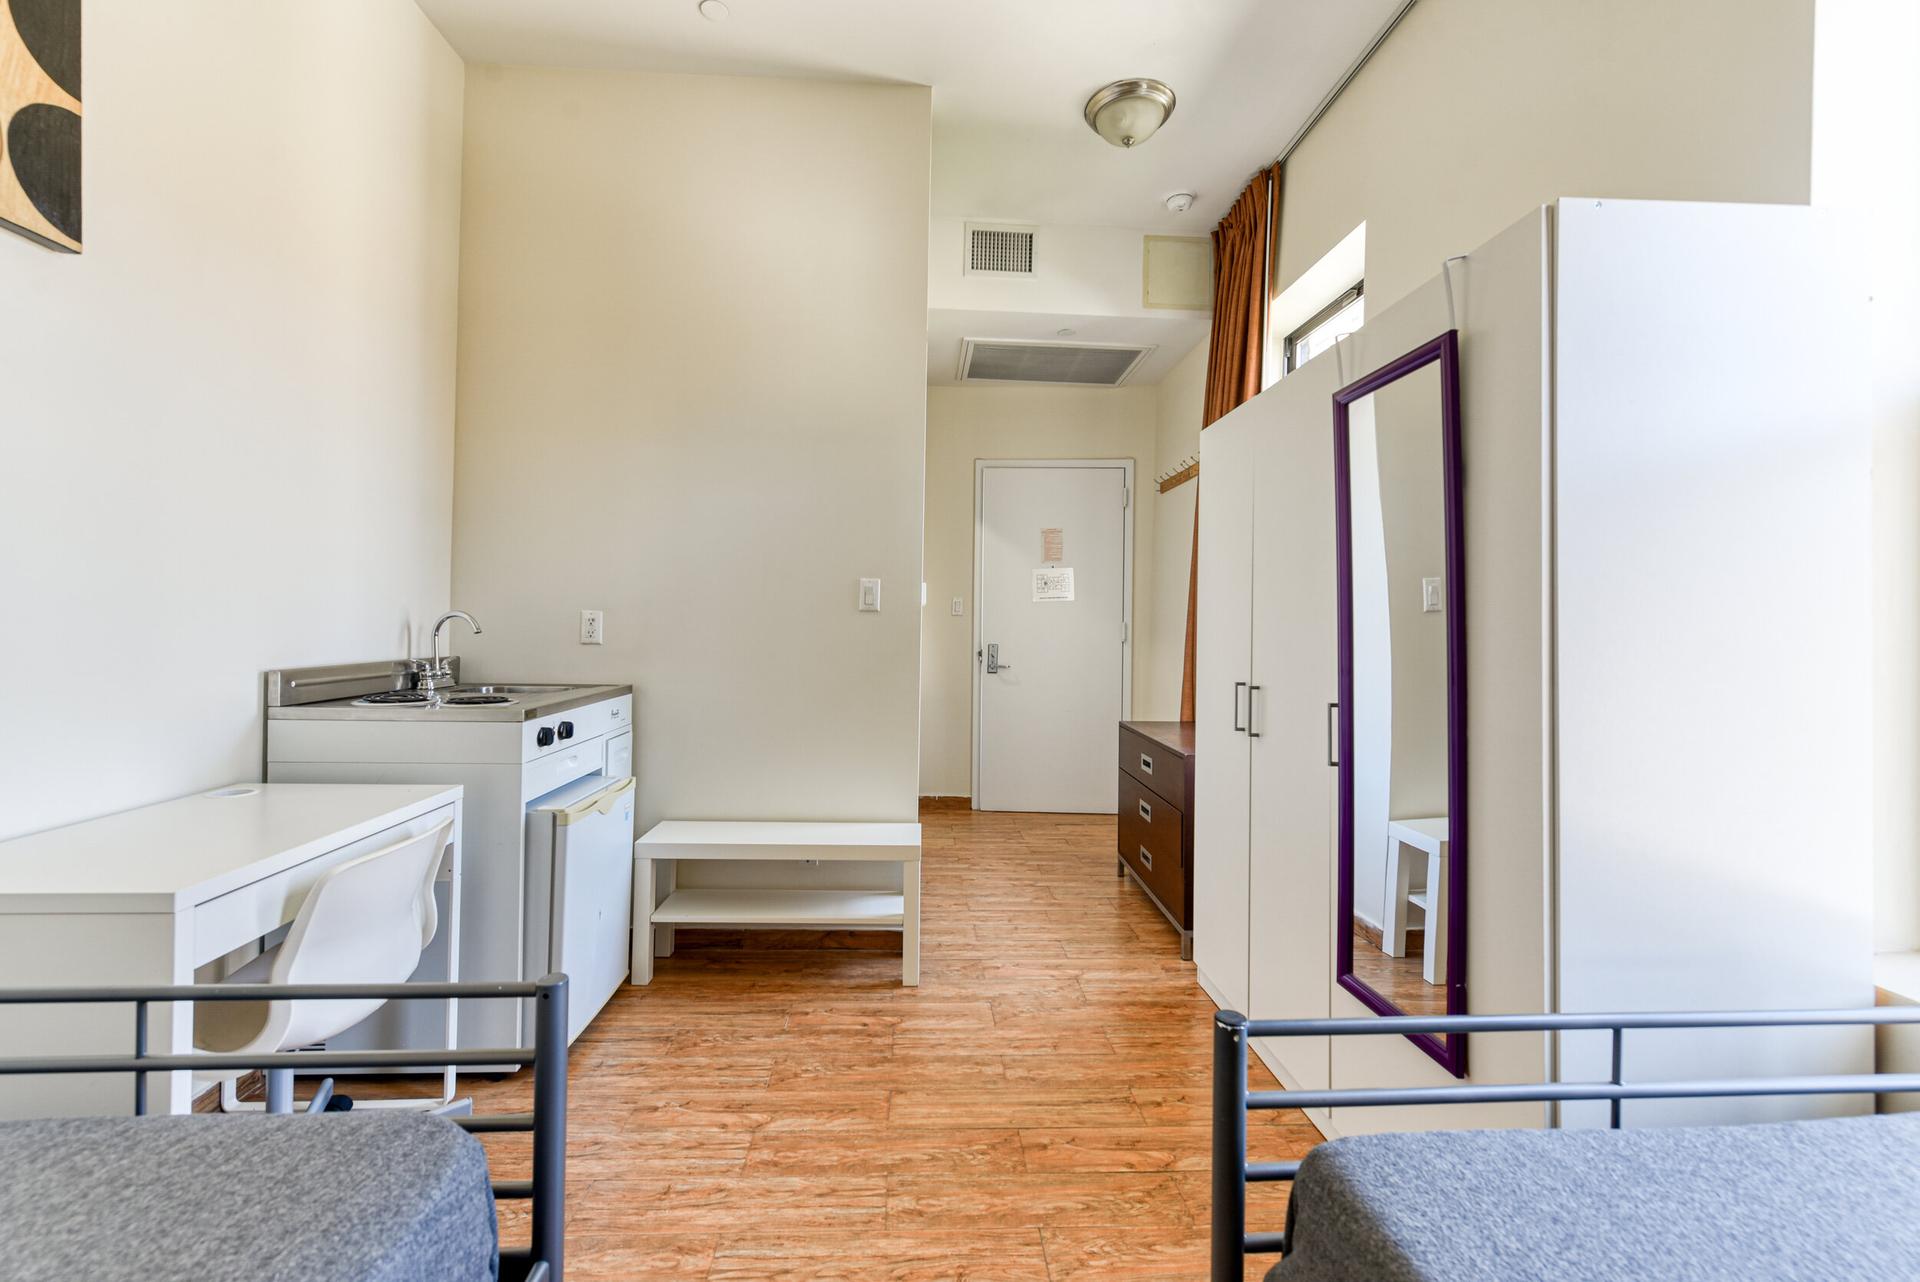 40x rule home rentals for students in Manhattan